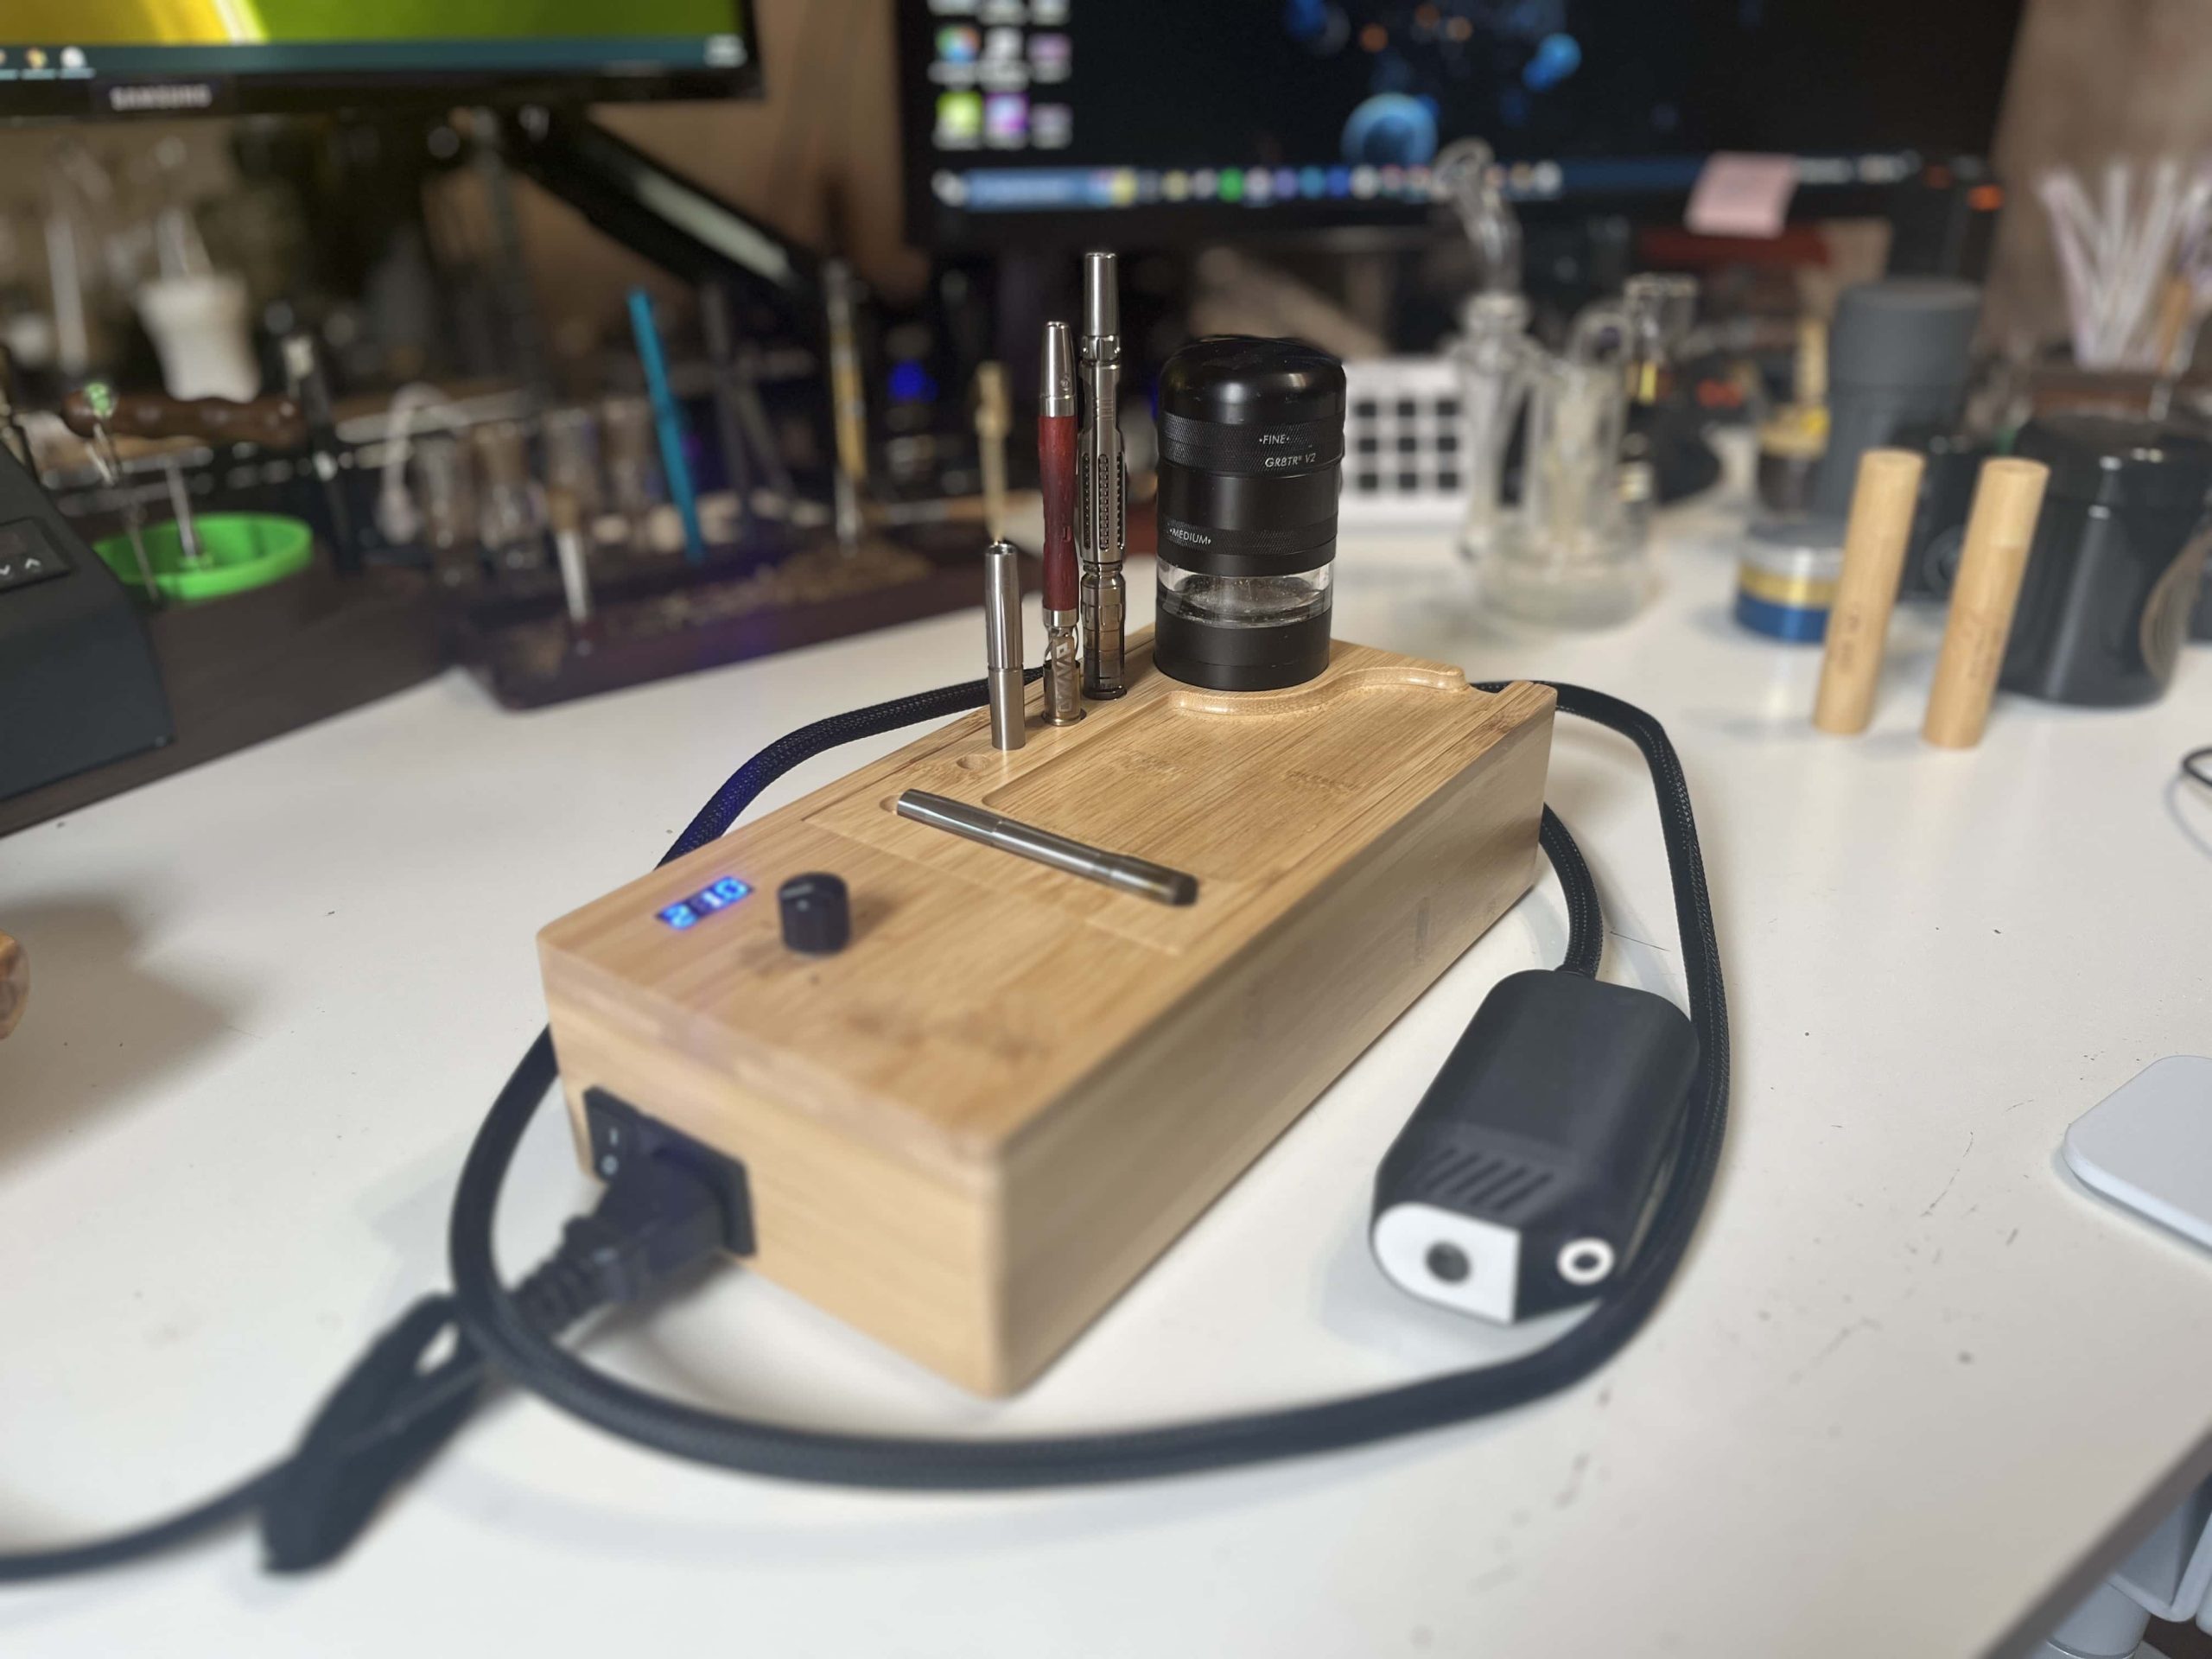 inductor with vapes